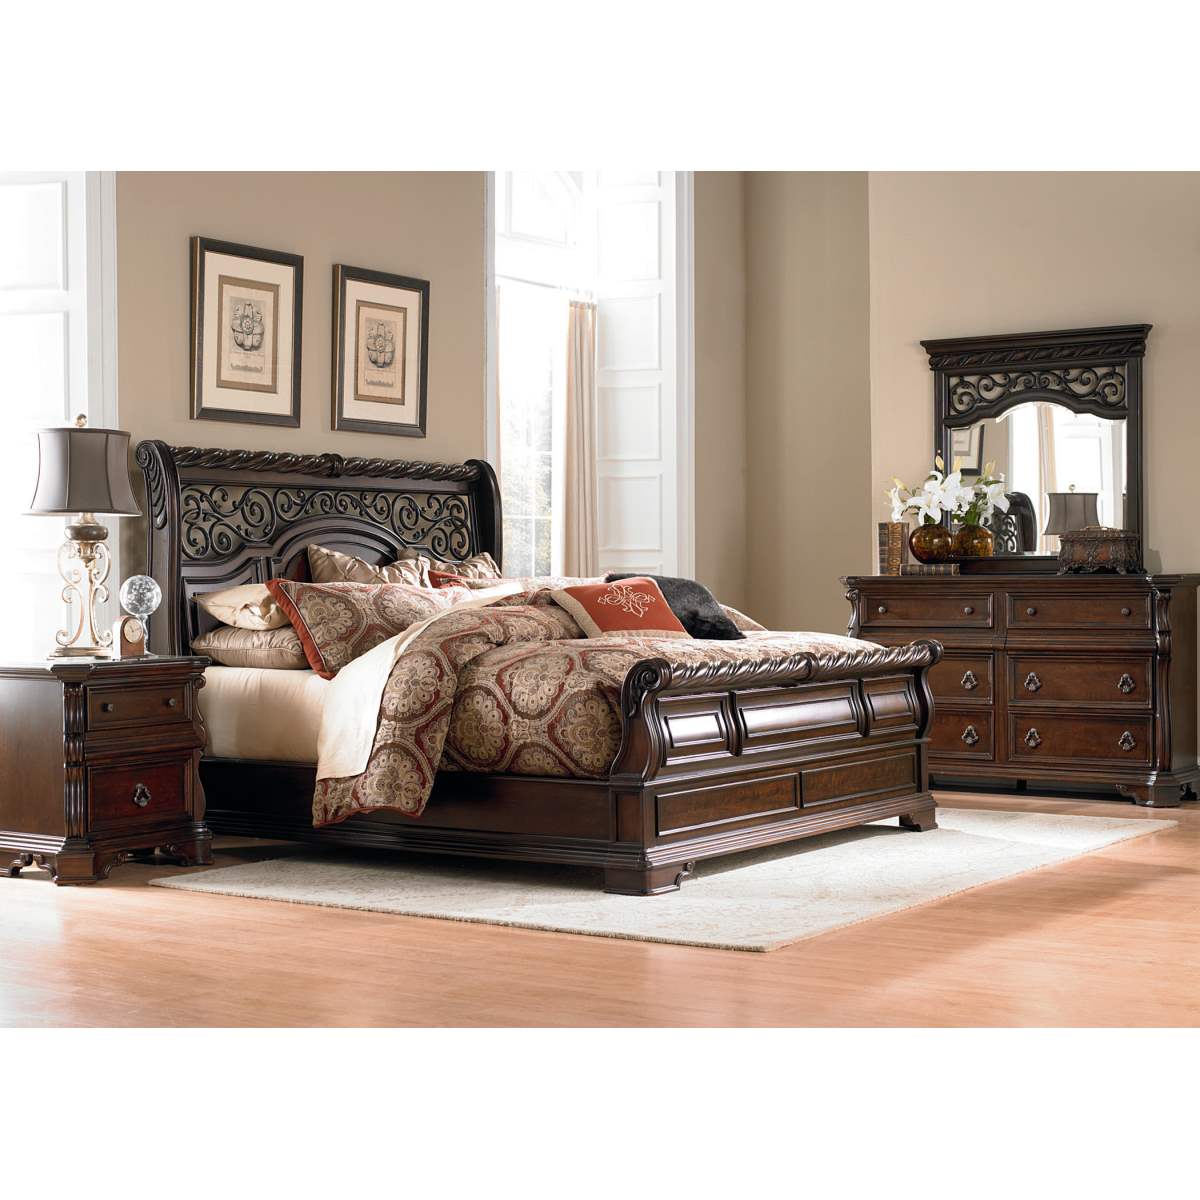 Liberty Arbor Place King Sleigh Bed, Dresser, Mirror & Nightstand